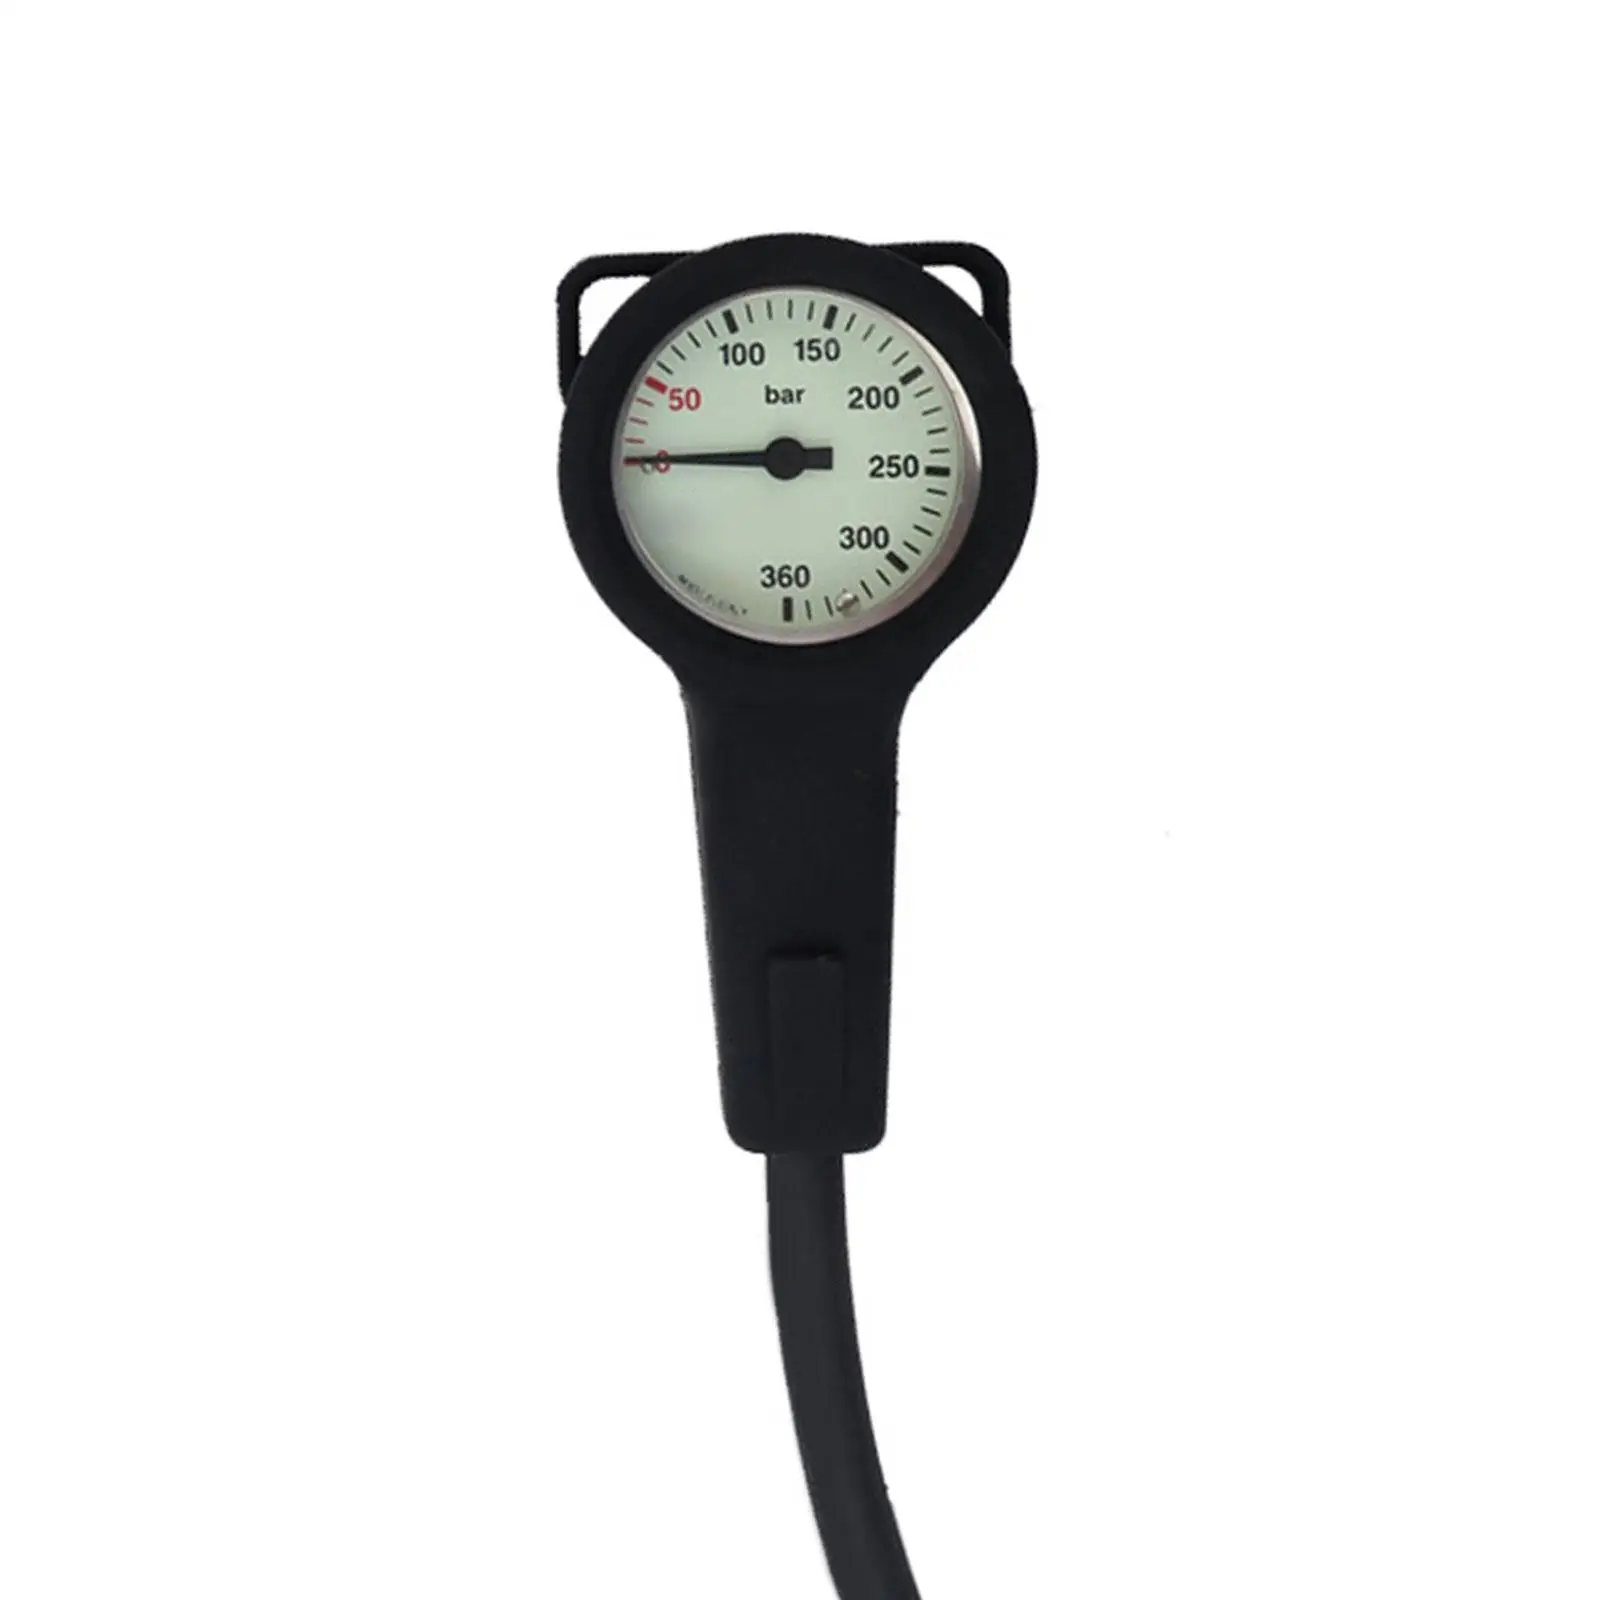 Scuba Pressure Gauge Boot with Loops Spg Protector Durable Convenient to Use